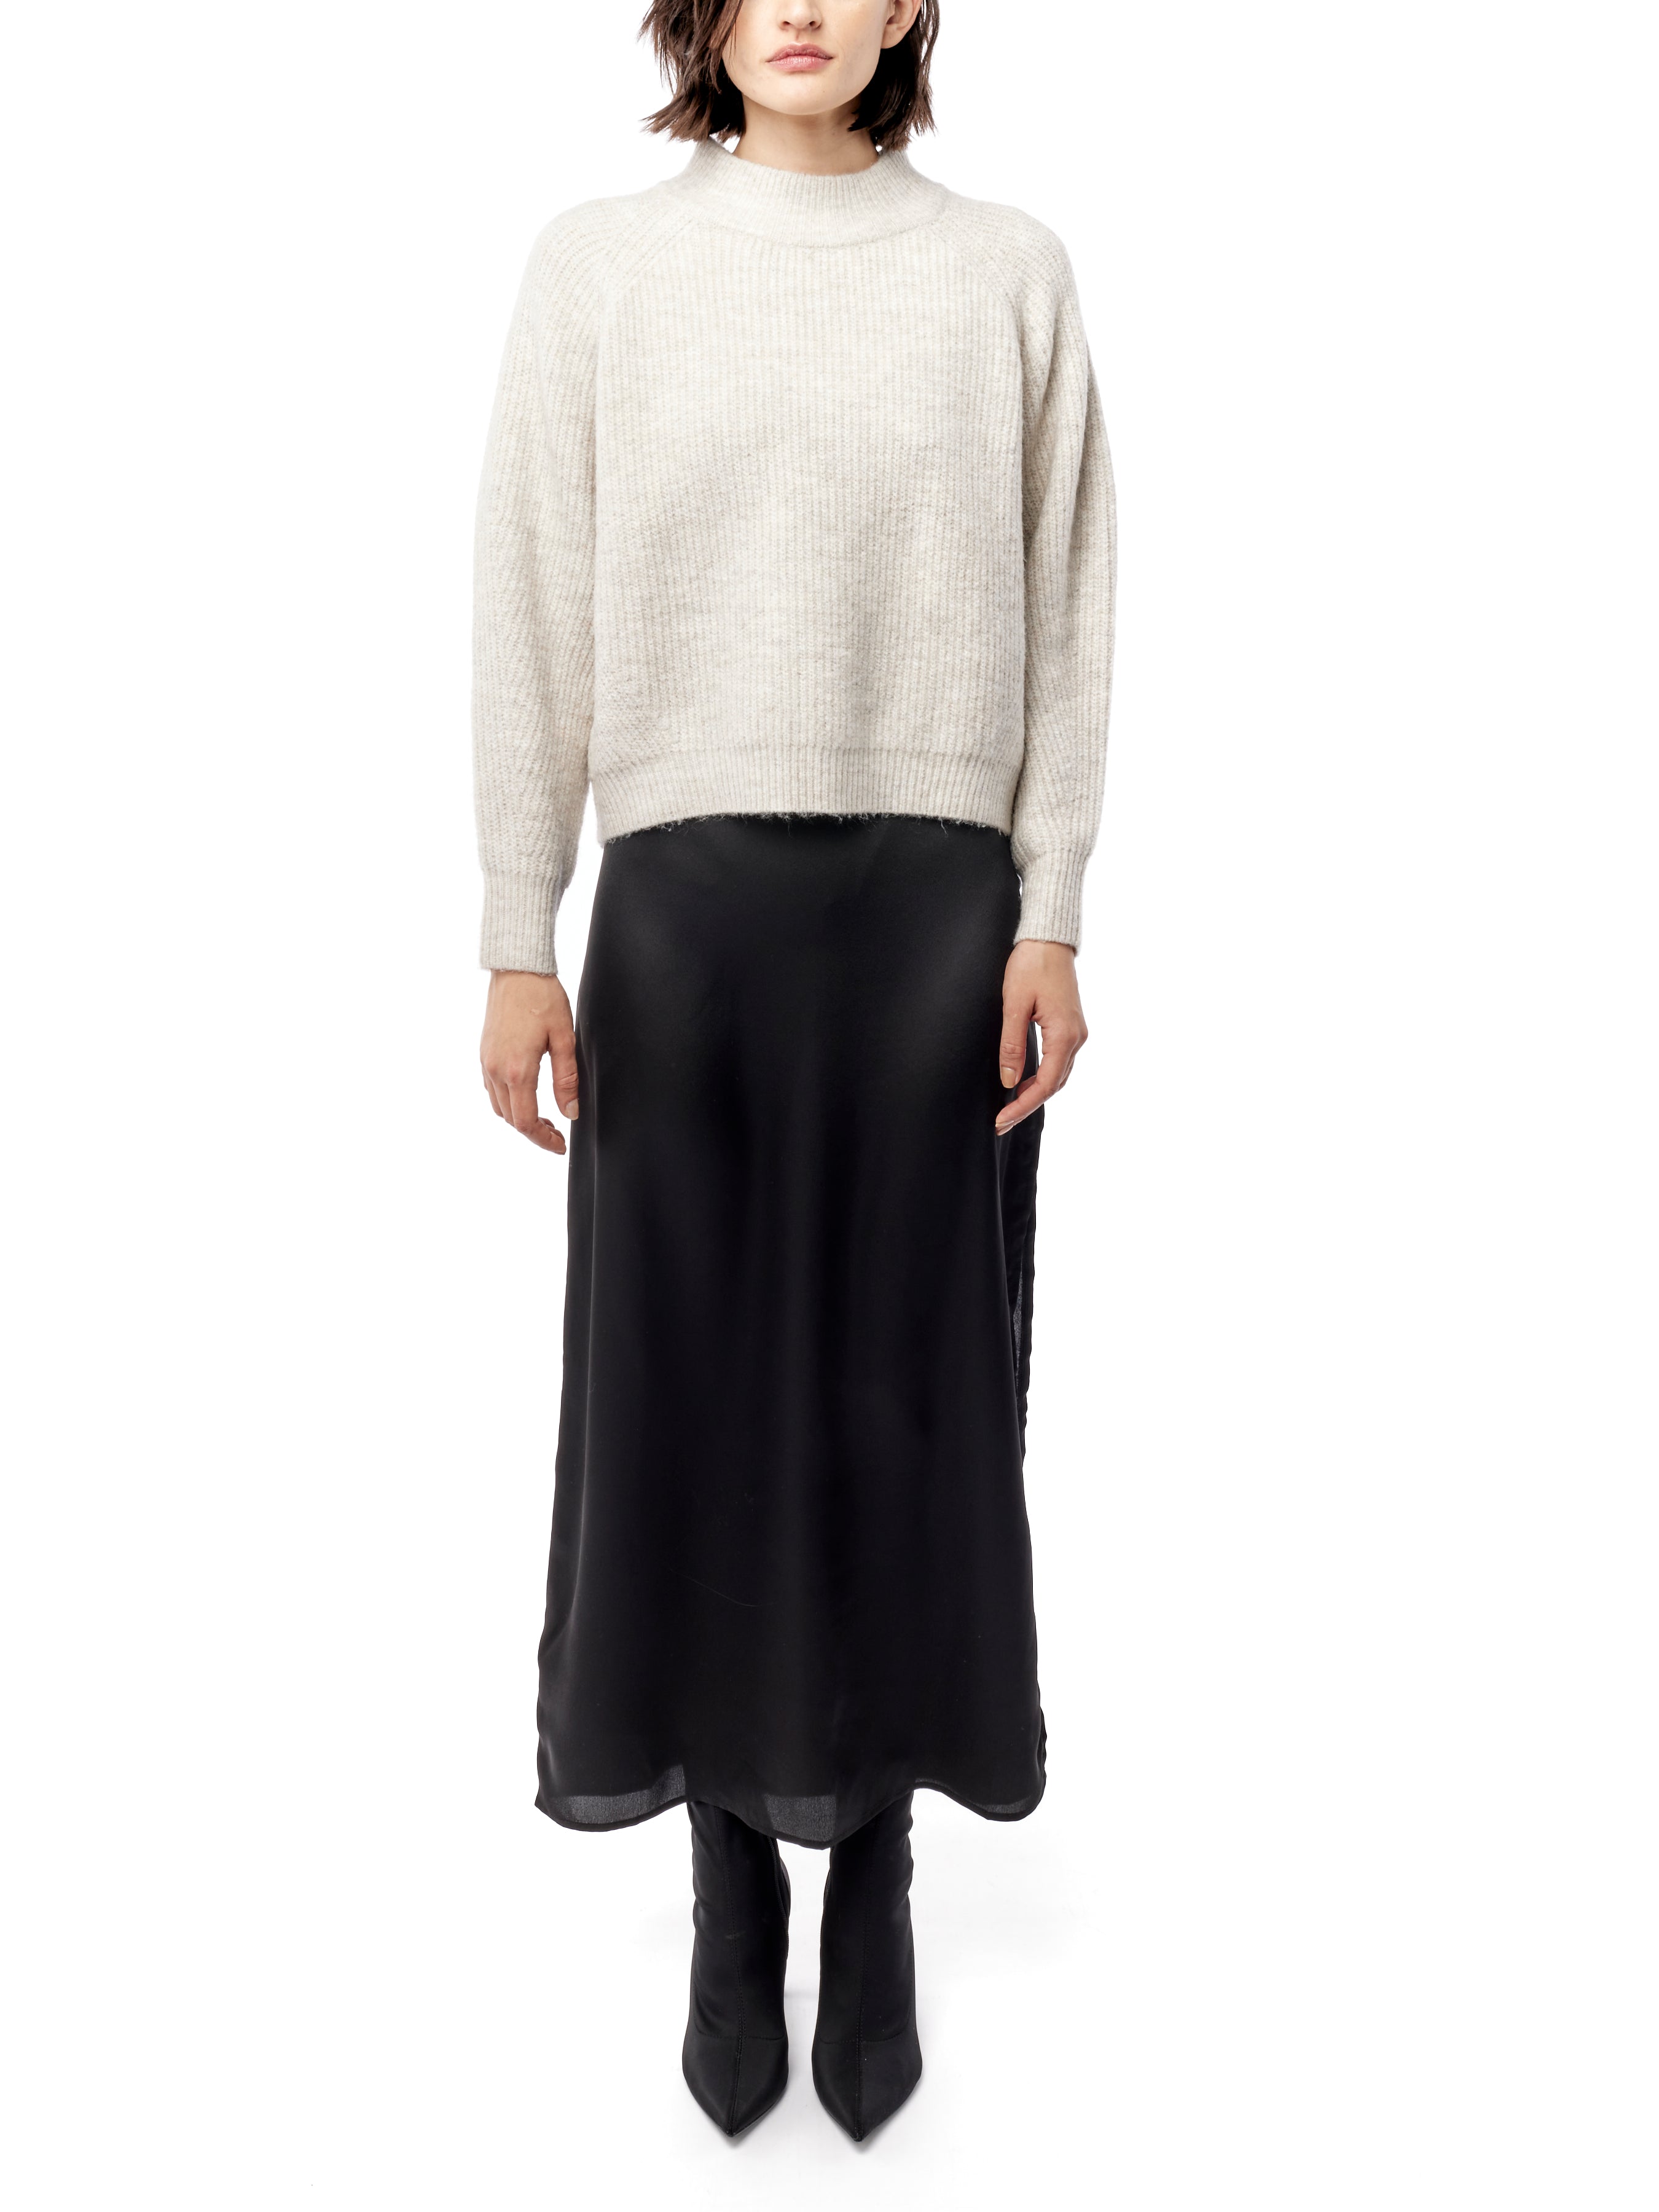 mock turtleneck sweater with stitch detailing, long sleeves and an easy, relaxed fit in oatmeal heather